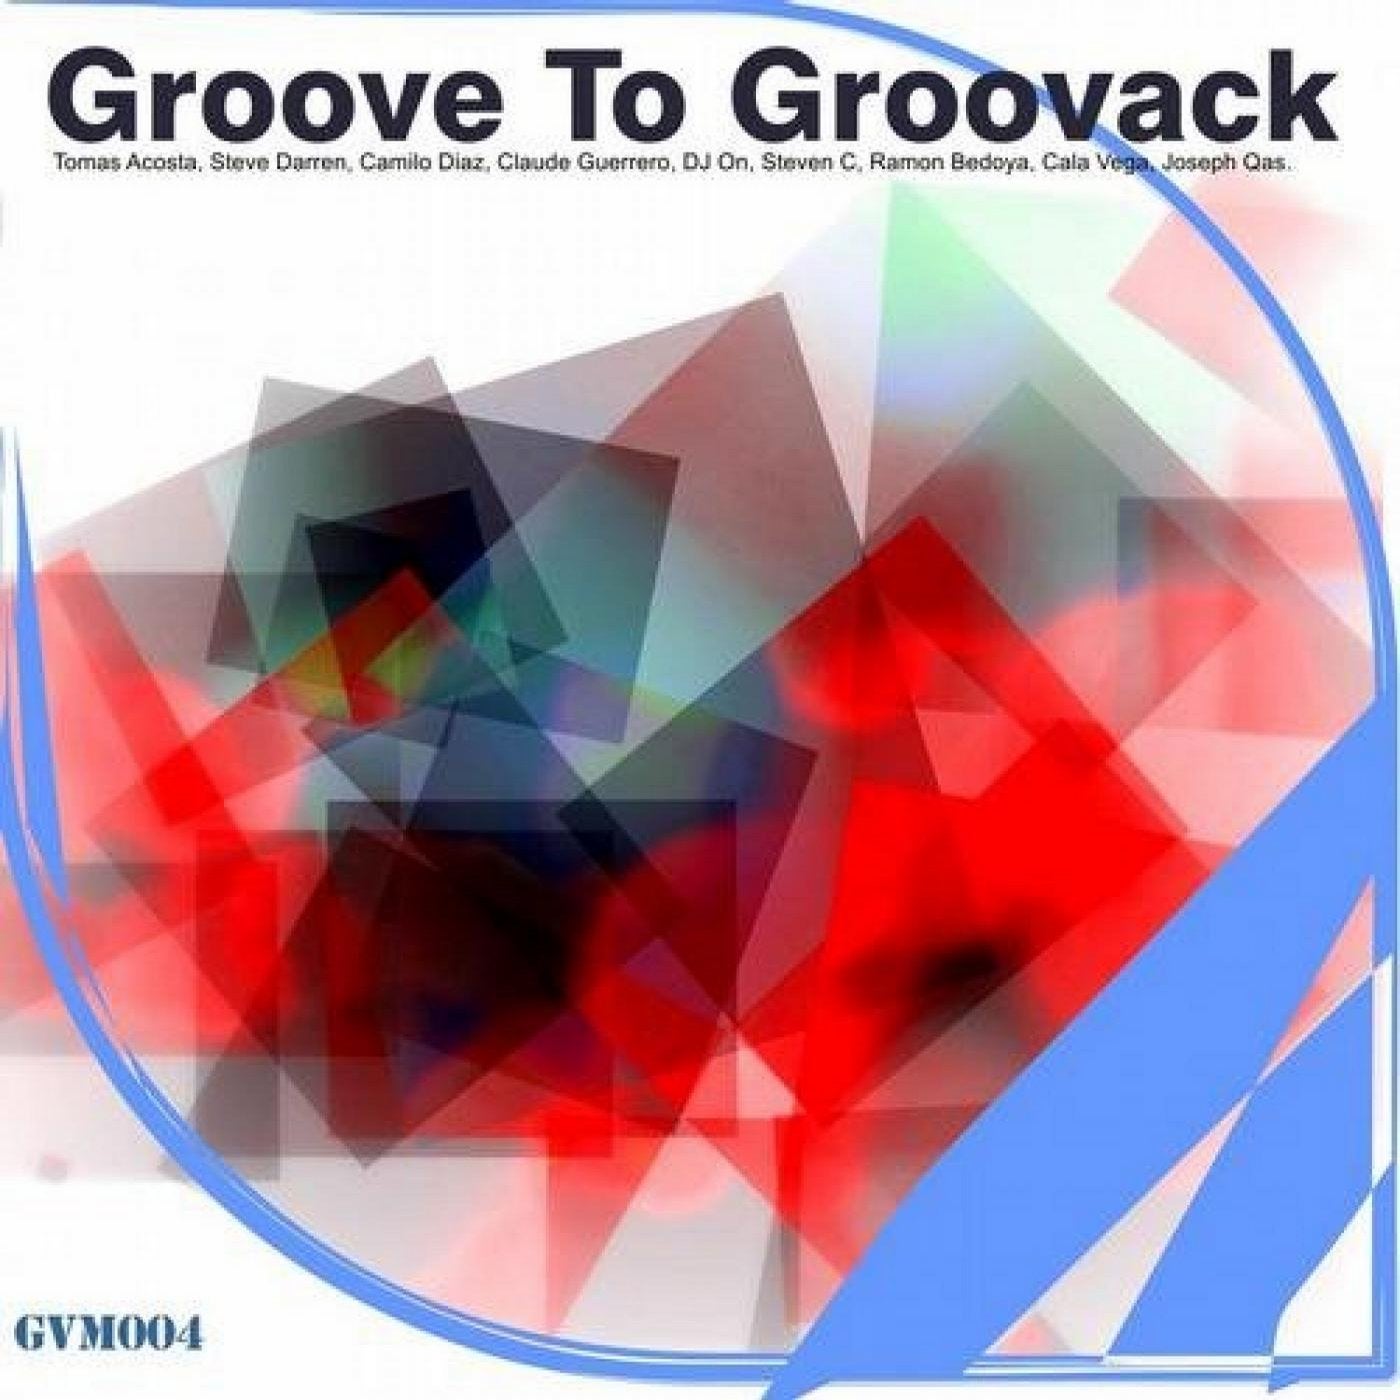 Groove to Groovack